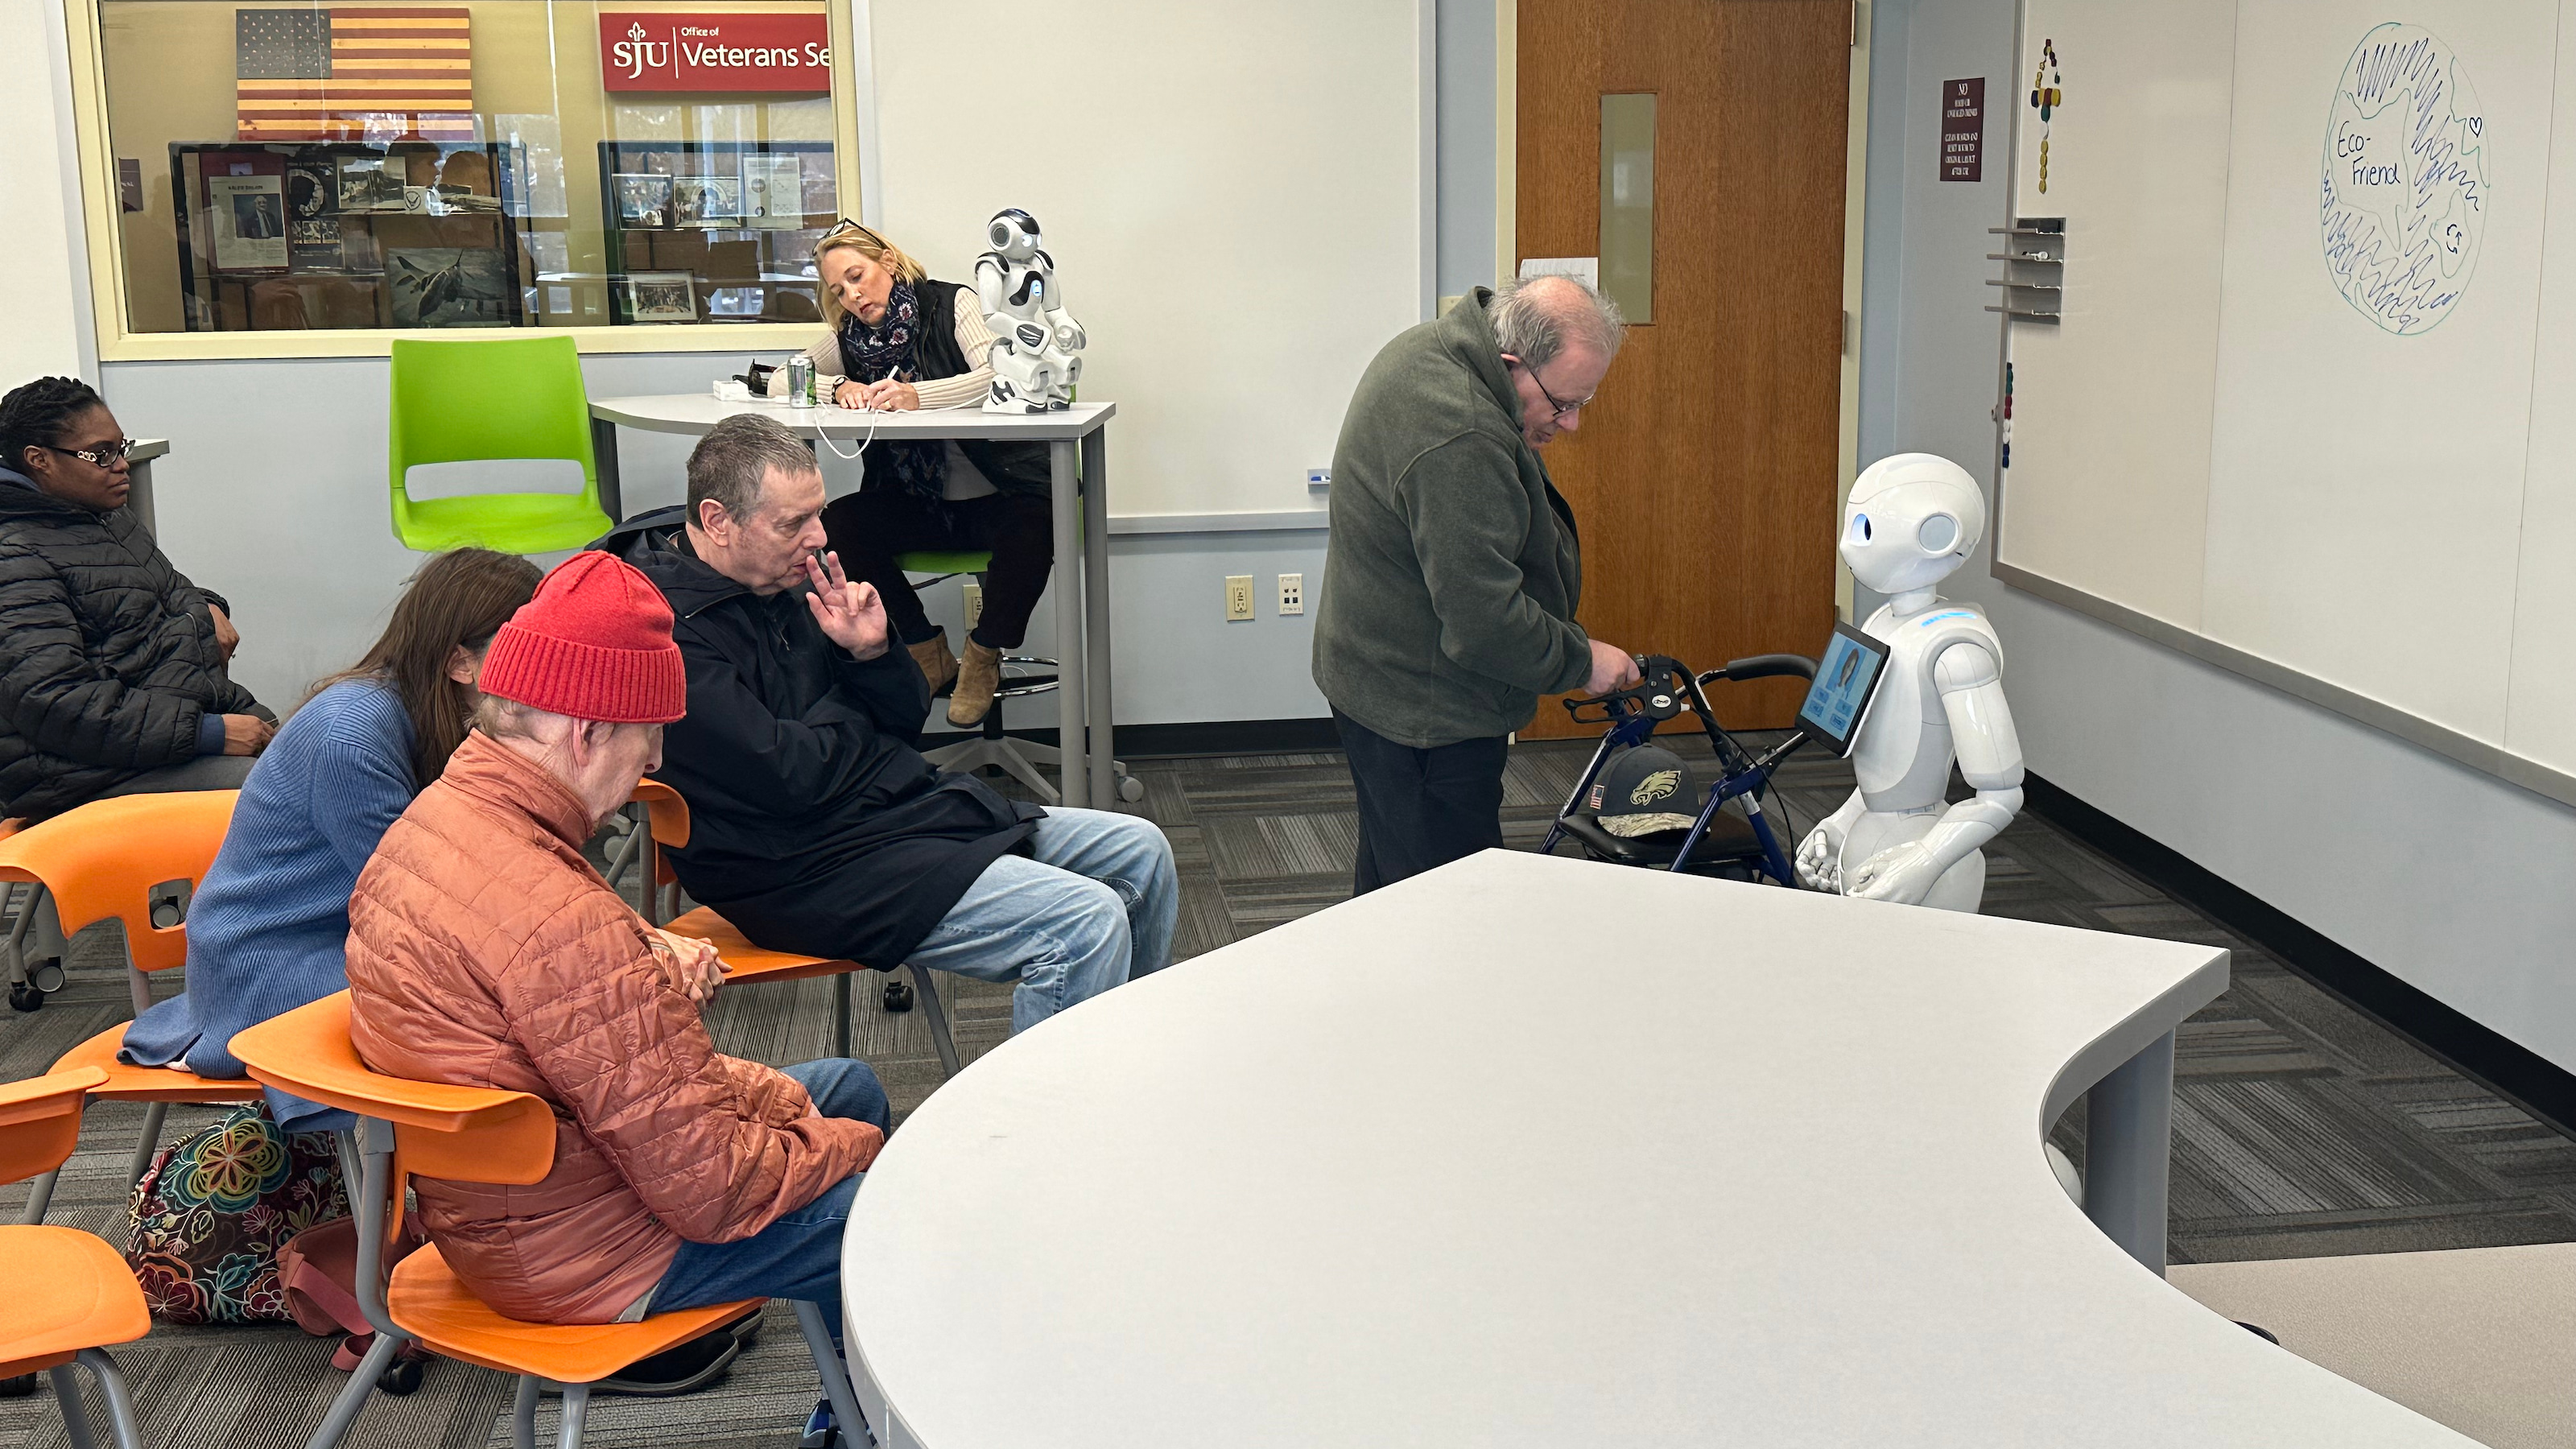 Bancroft residents interacting with Iggy during a visit to the Haub Innovation Center on Dec. 8.